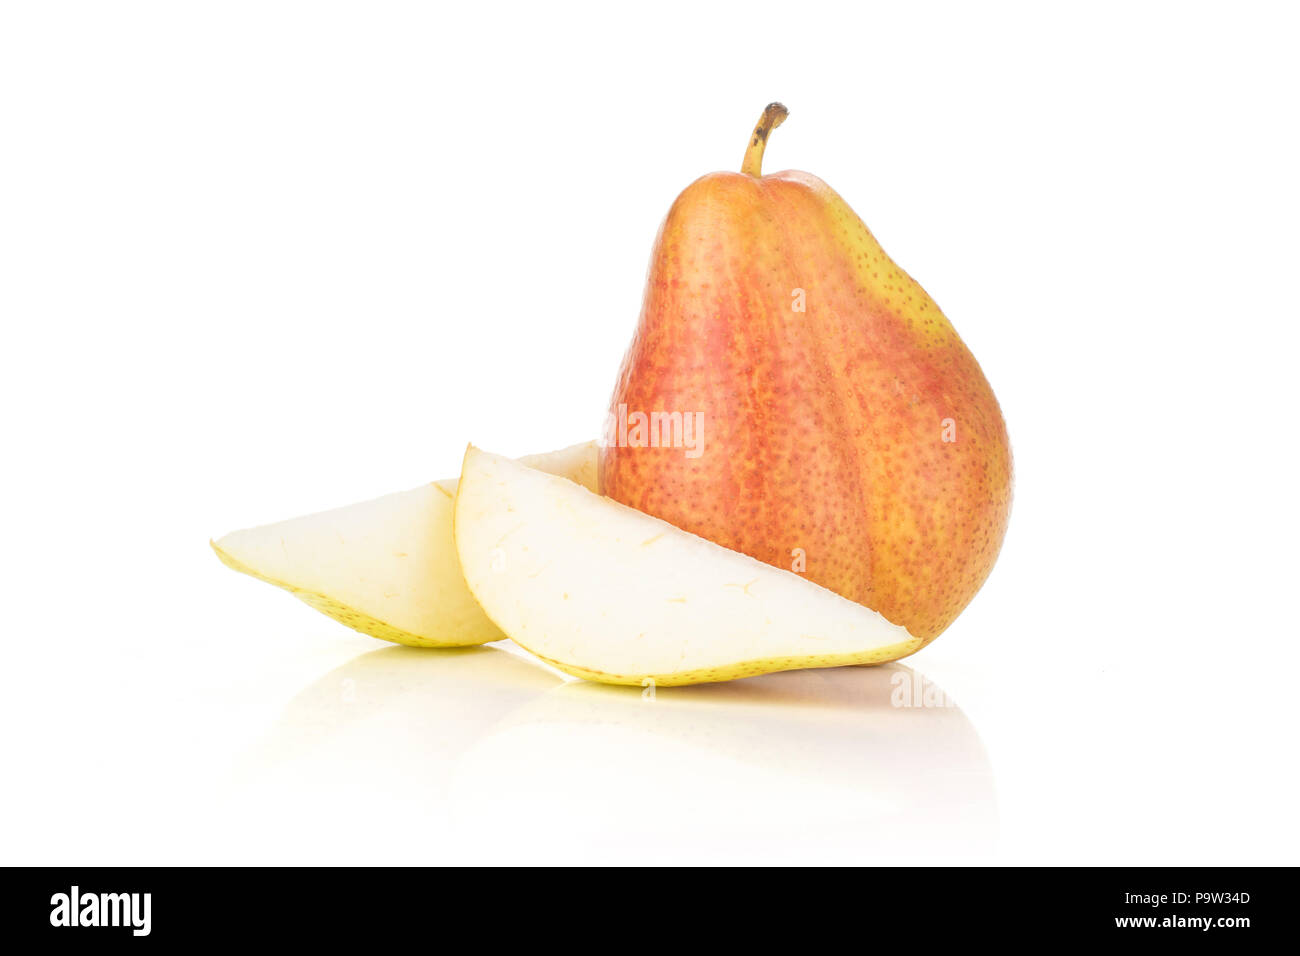 Group of one whole two slices of fresh red pear forelle variety isolated on white Stock Photo